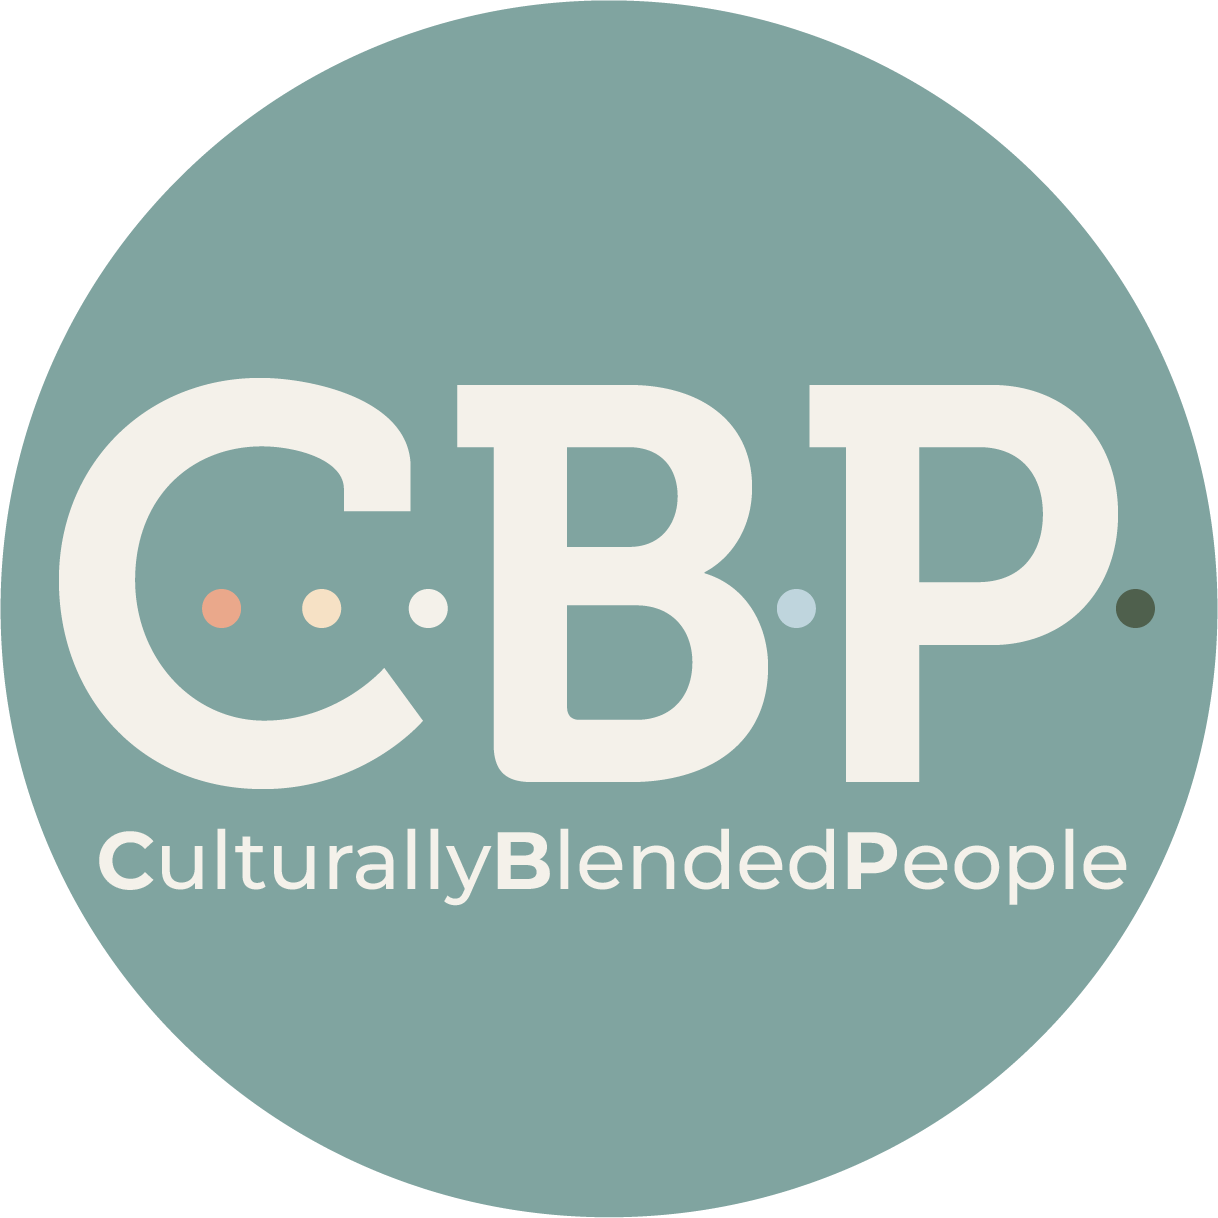 Culturally Blended People